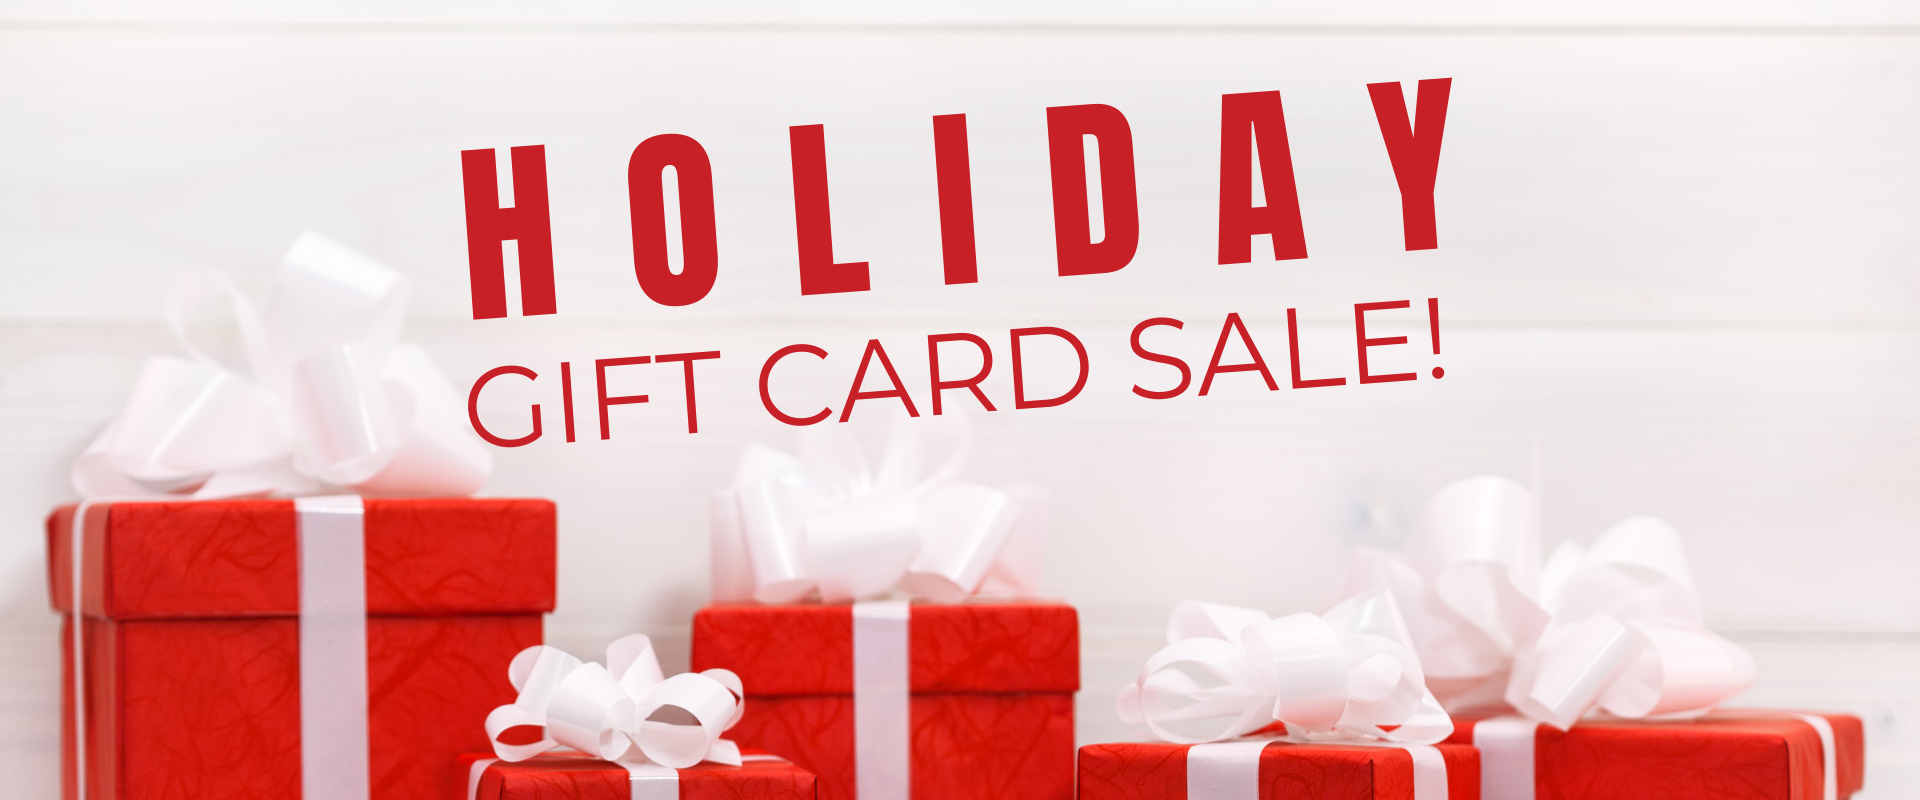 HOLIDAY GIFT CARD SALE AT BLUE HARBOR RESORT WEB FEATURE